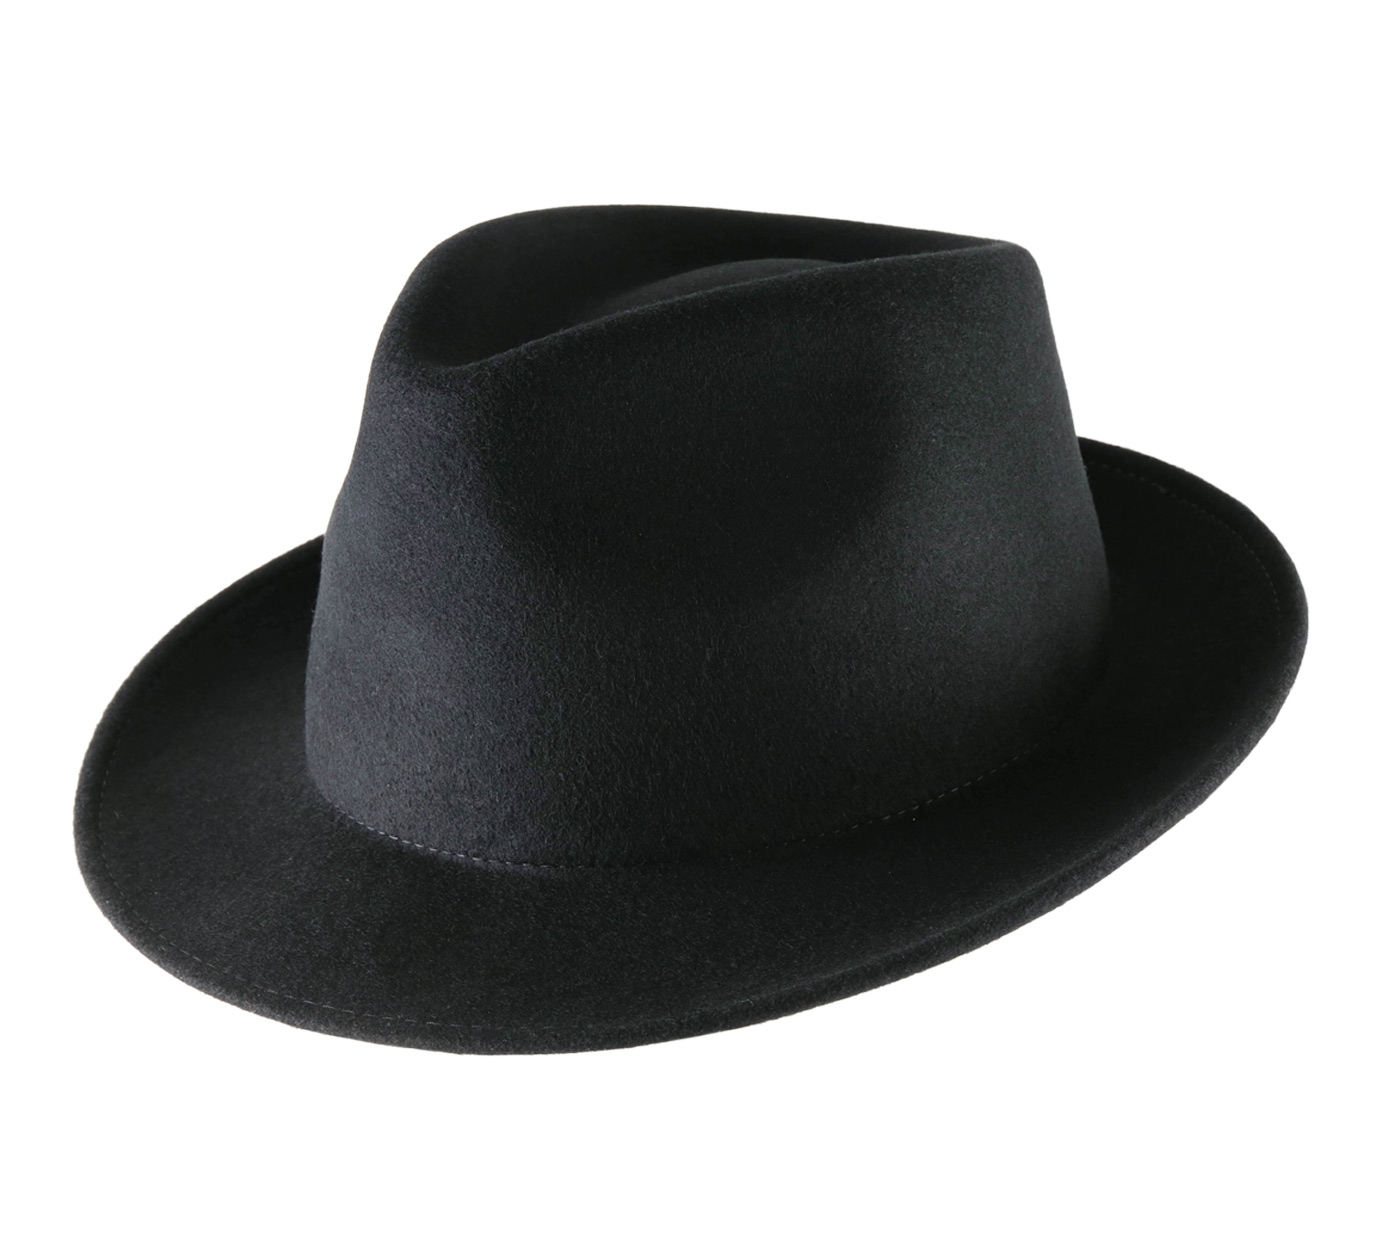 Classic Italy - Trilby Hat Crushable Waterproof Nude Trilby Large Black